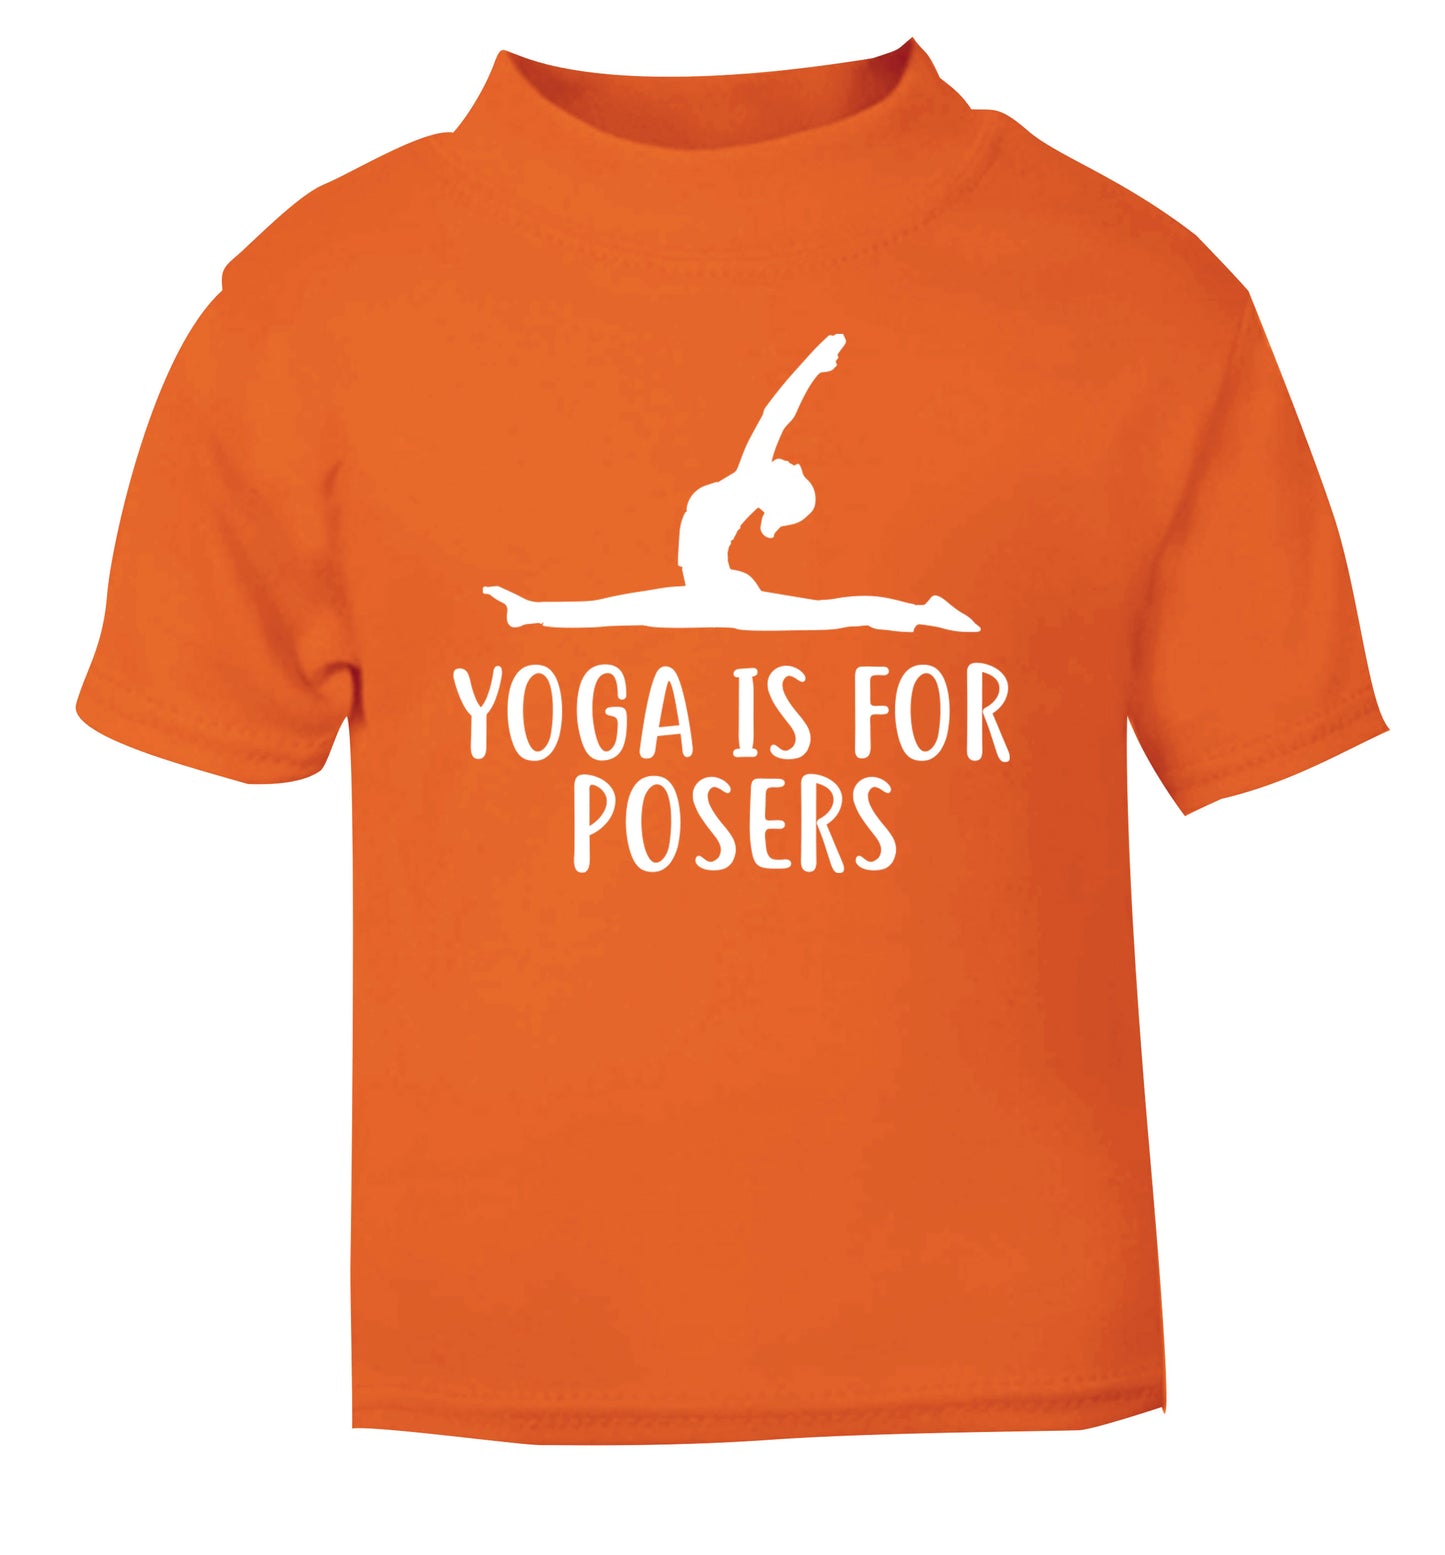 Yoga is for posers orange Baby Toddler Tshirt 2 Years